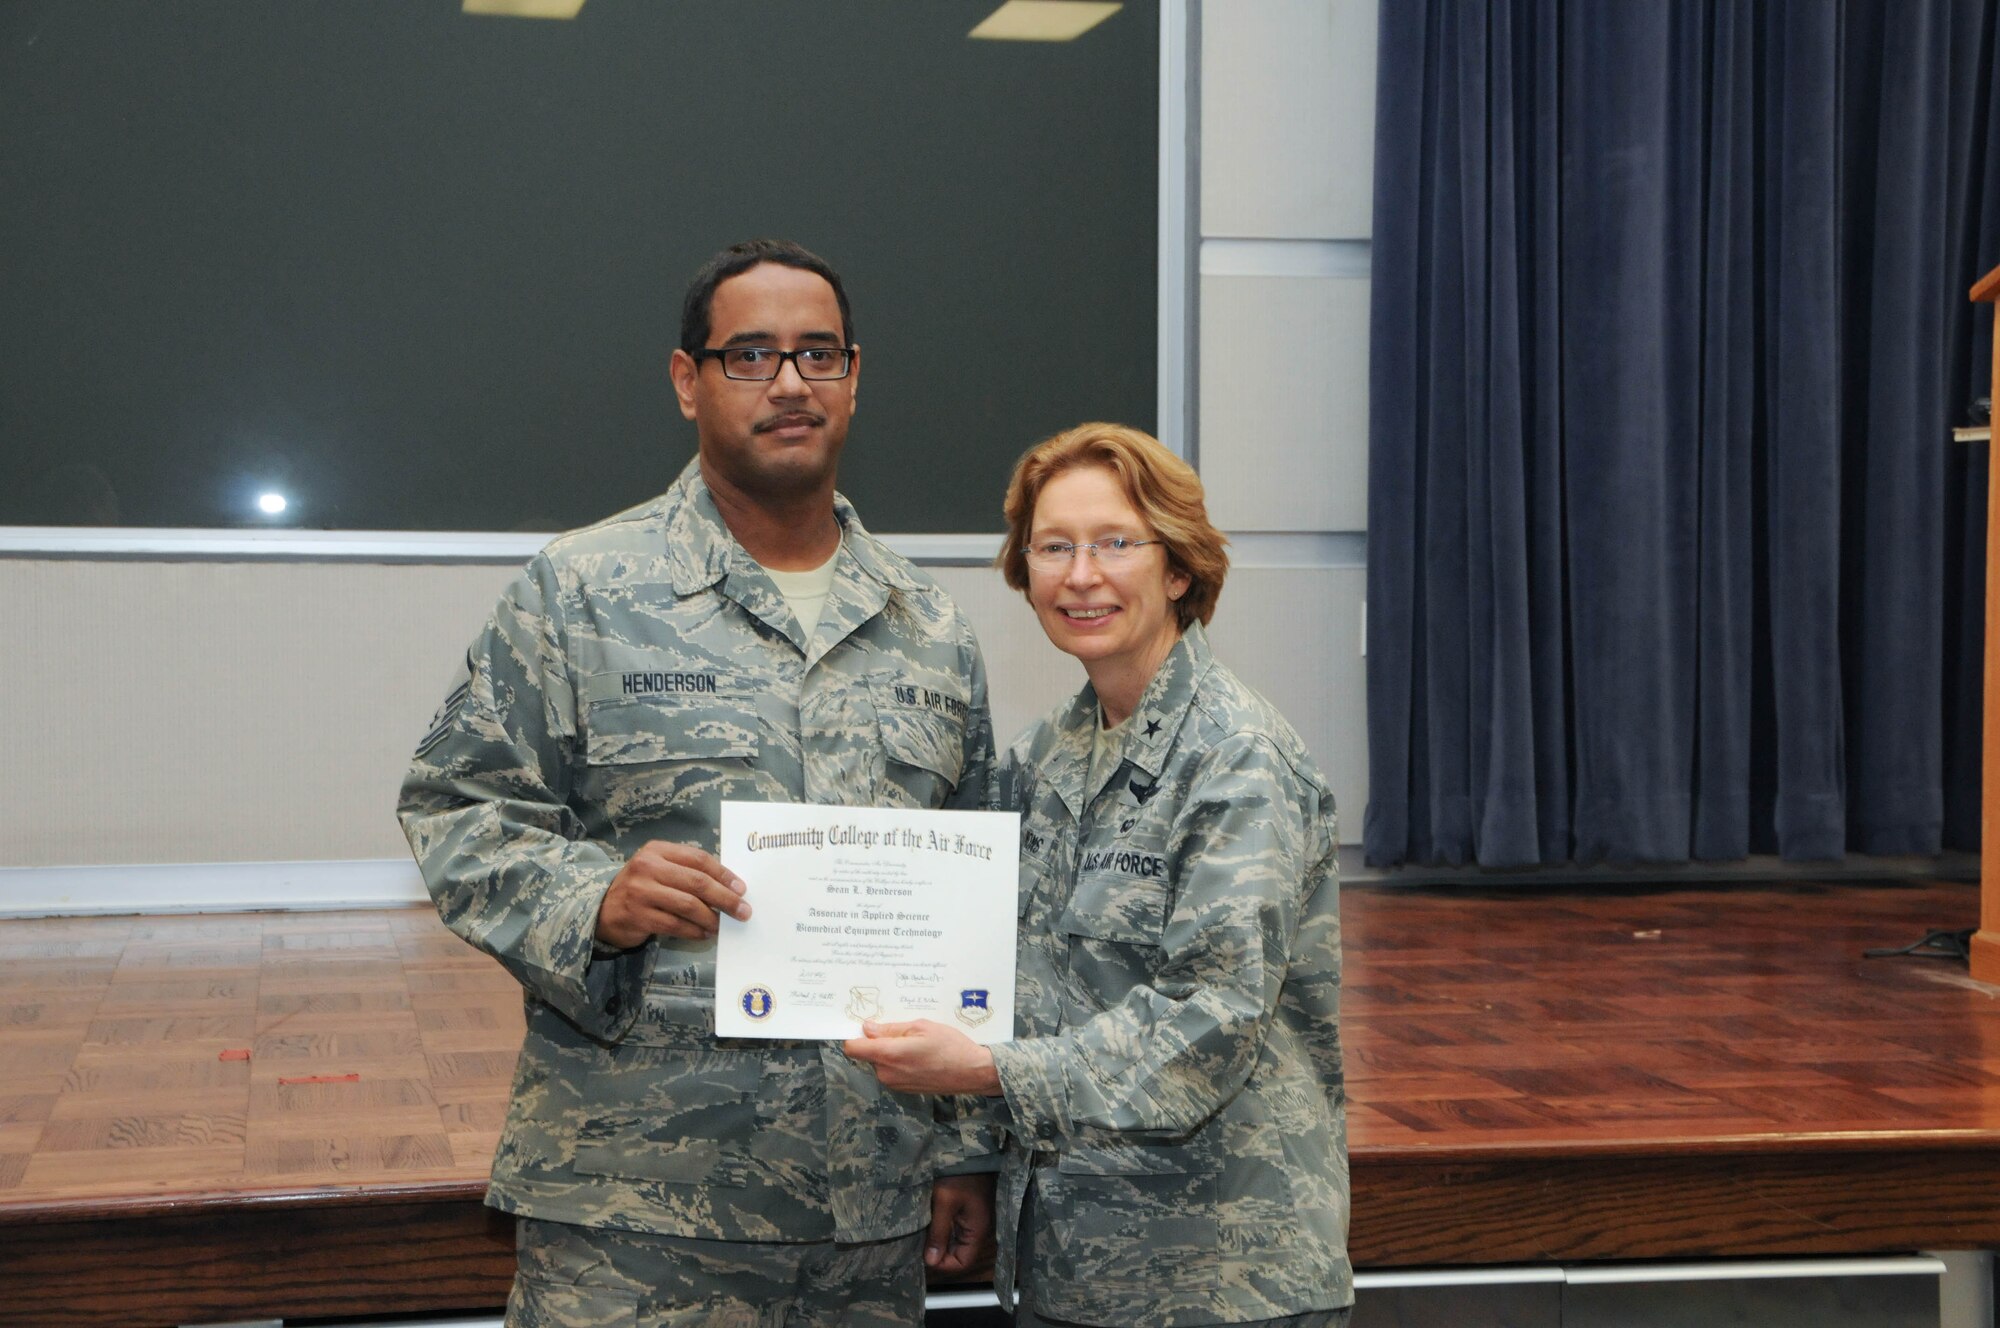 U.S. Air Force Master Sgt. Sean Henderson, left, a member of the 166th Medical Group, 166th Airlift Wing, receives a certificate from Brig. Gen. Carol Timmons, assistant adjutant general for air, Delaware National Guard to recognize Henderson’s attainment of a Community College of the Air Force associate of applied science degree in biomedical equipment technology at a CCAF Class of October 2013 graduation ceremony held Nov. 3, 2013 at the New Castle Air National Guard Base, Del. (U.S. Air National Guard photo by Tech. Sgt. Robin Meredith)